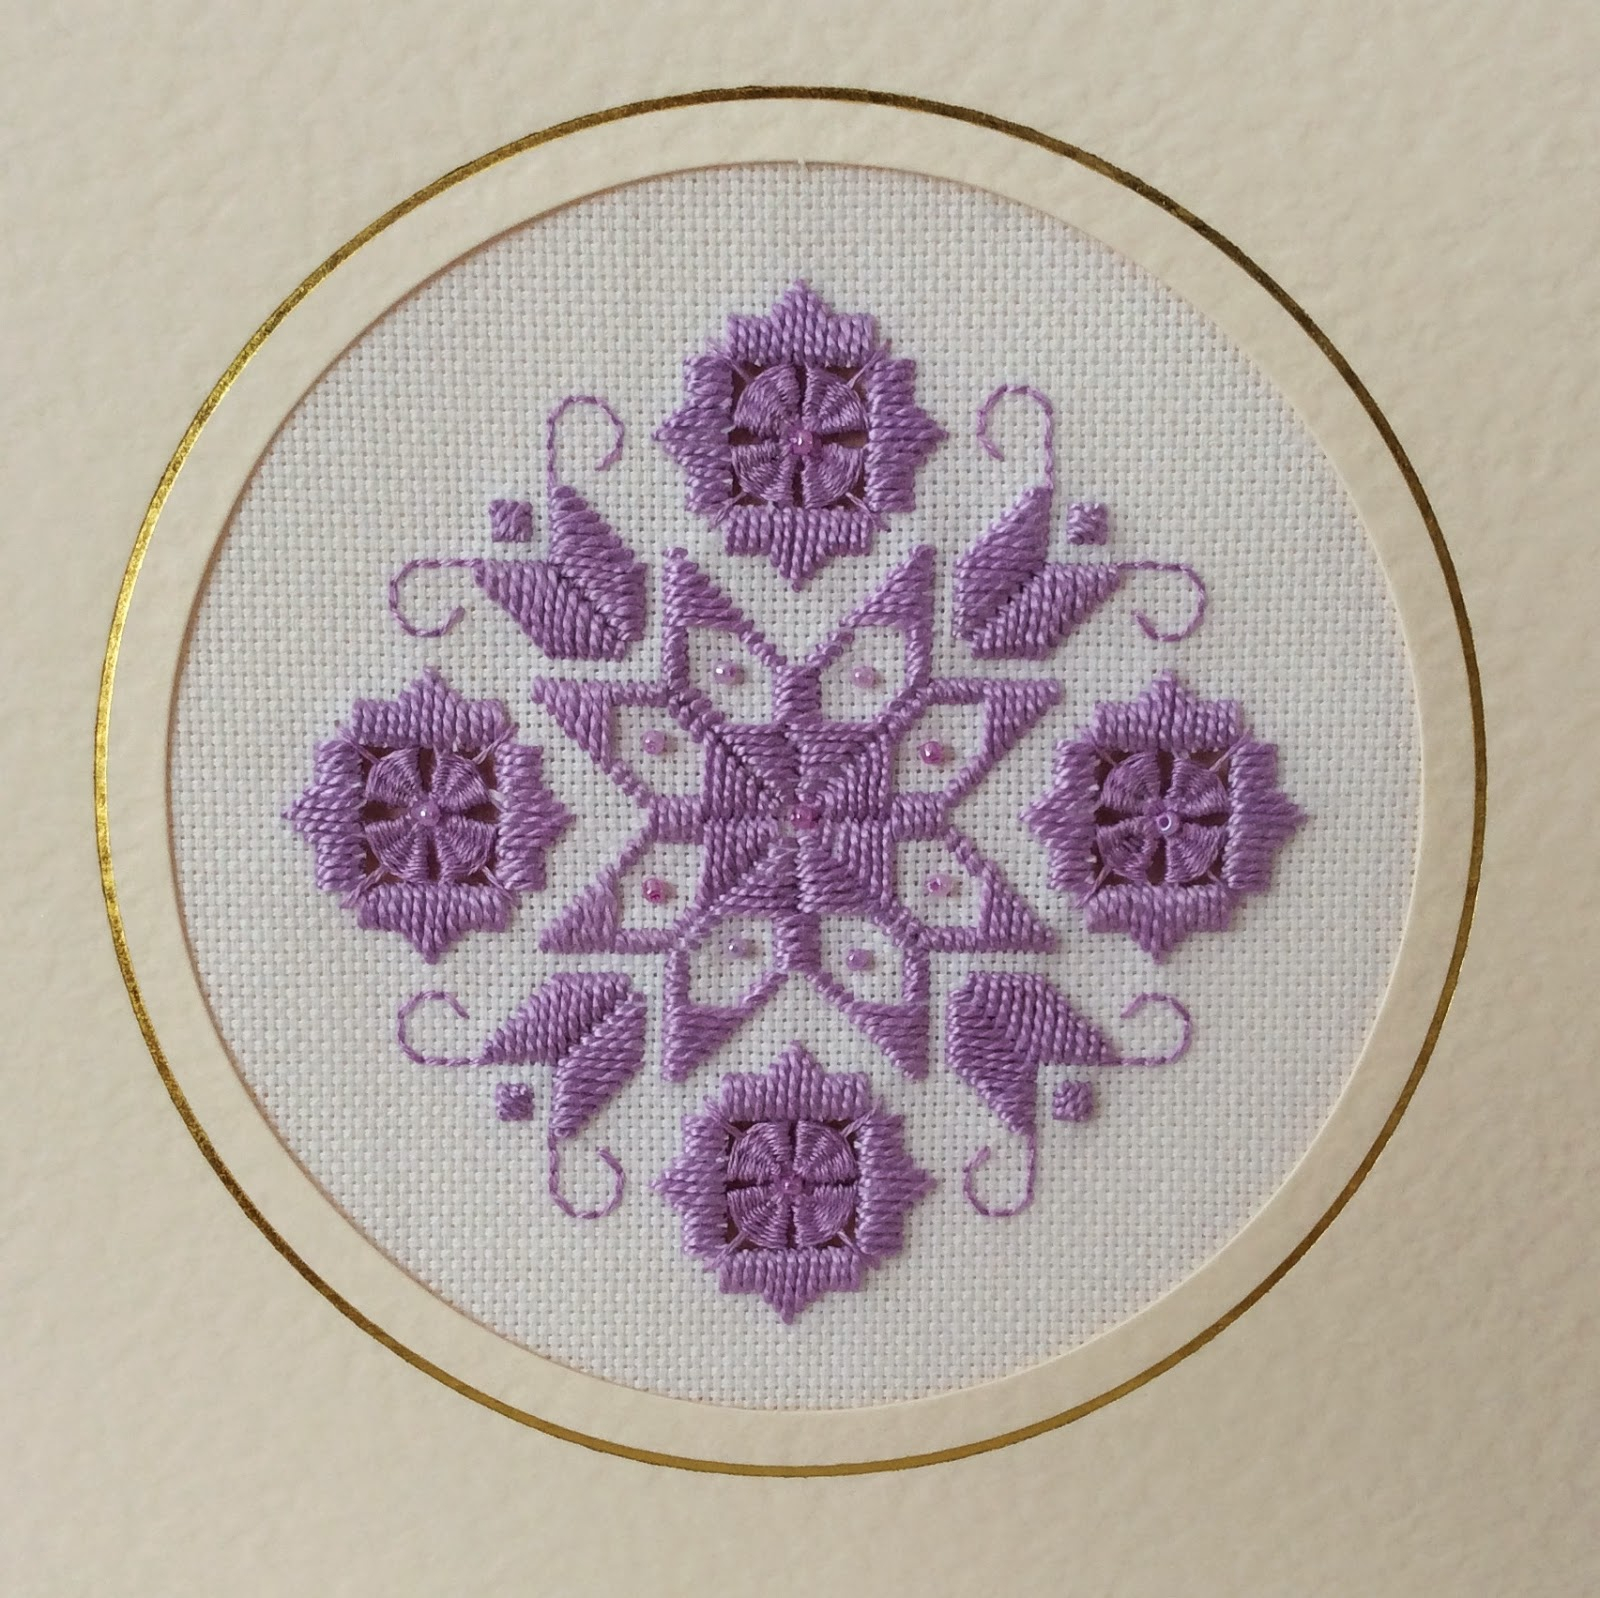 Hardanger Embroidery Patterns Online Free Mary Joan Stitching Hardanger Gallery